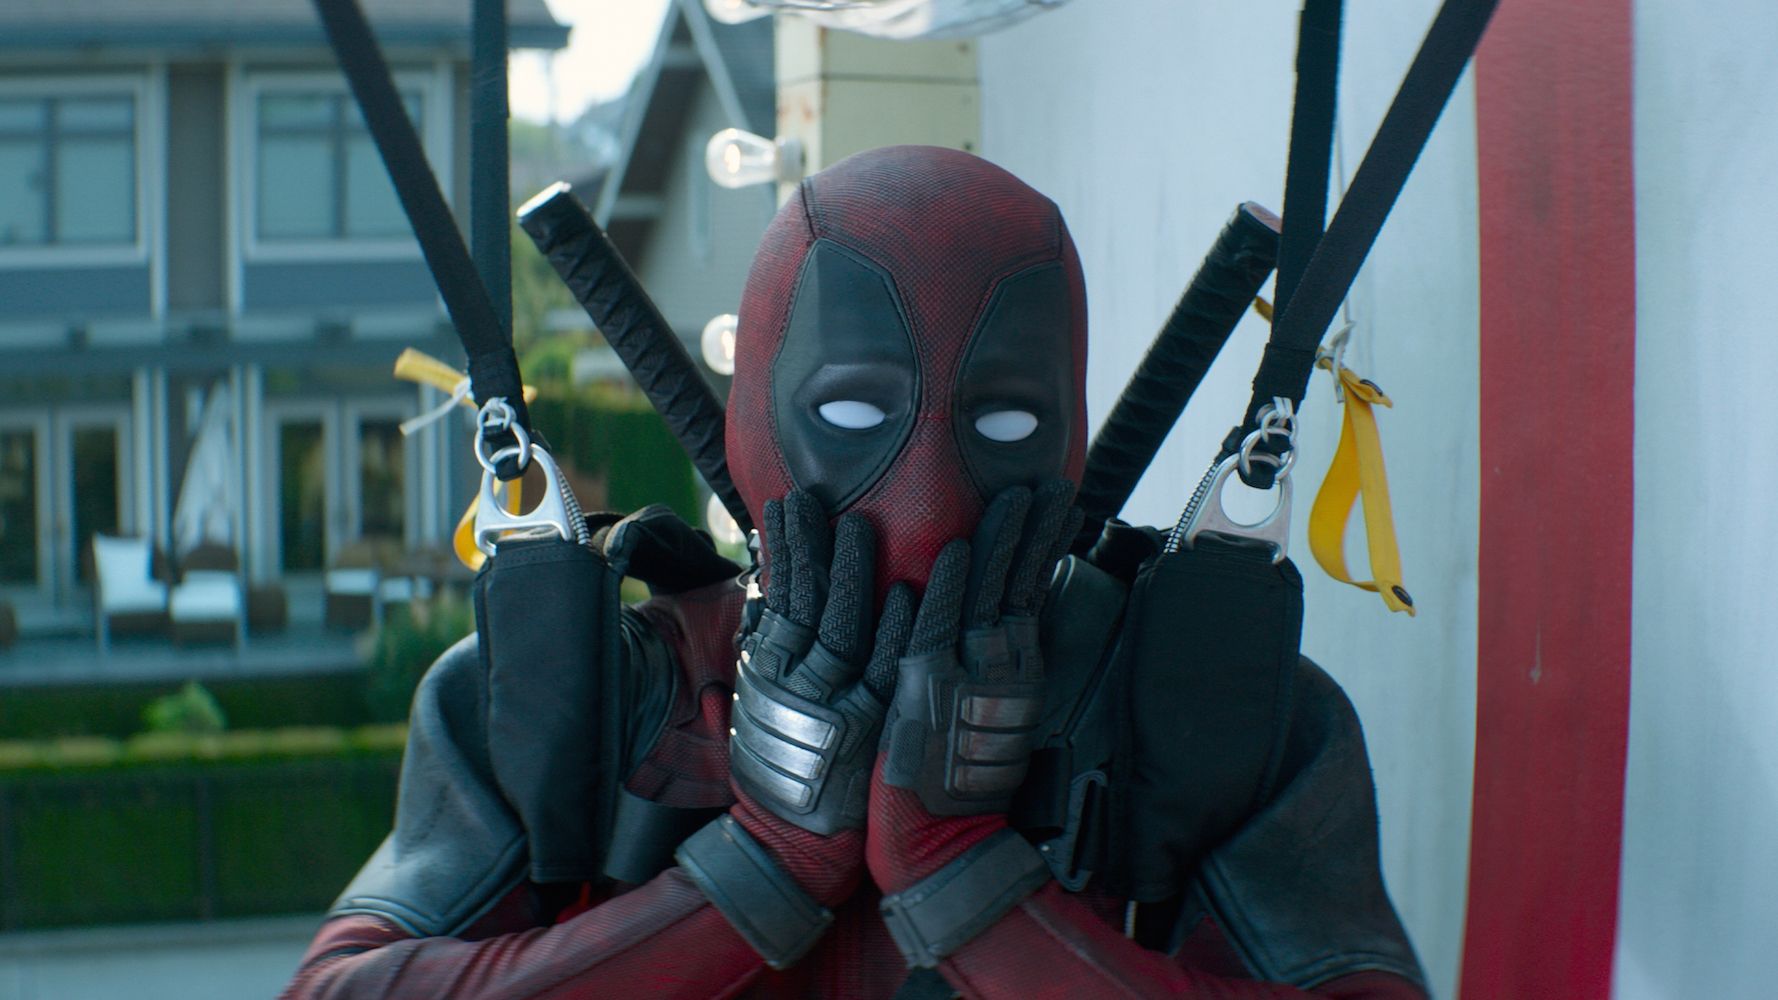 Deadpool 3 A Marvel Extravaganza Set to Shatter Expectations